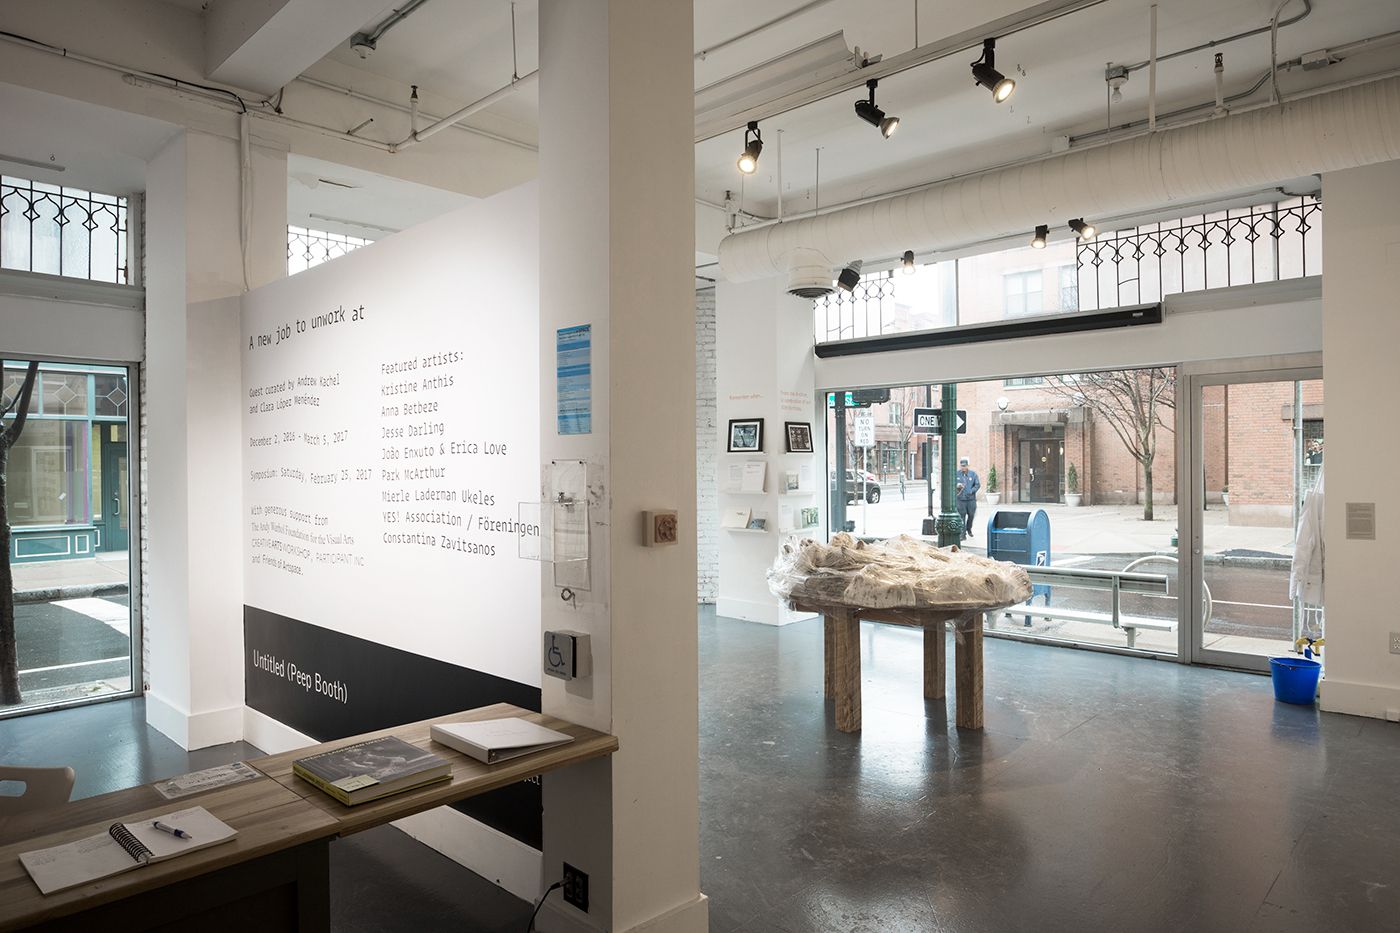 Artspace interior, showing an architectural sculpture on a table and the gallery wall.